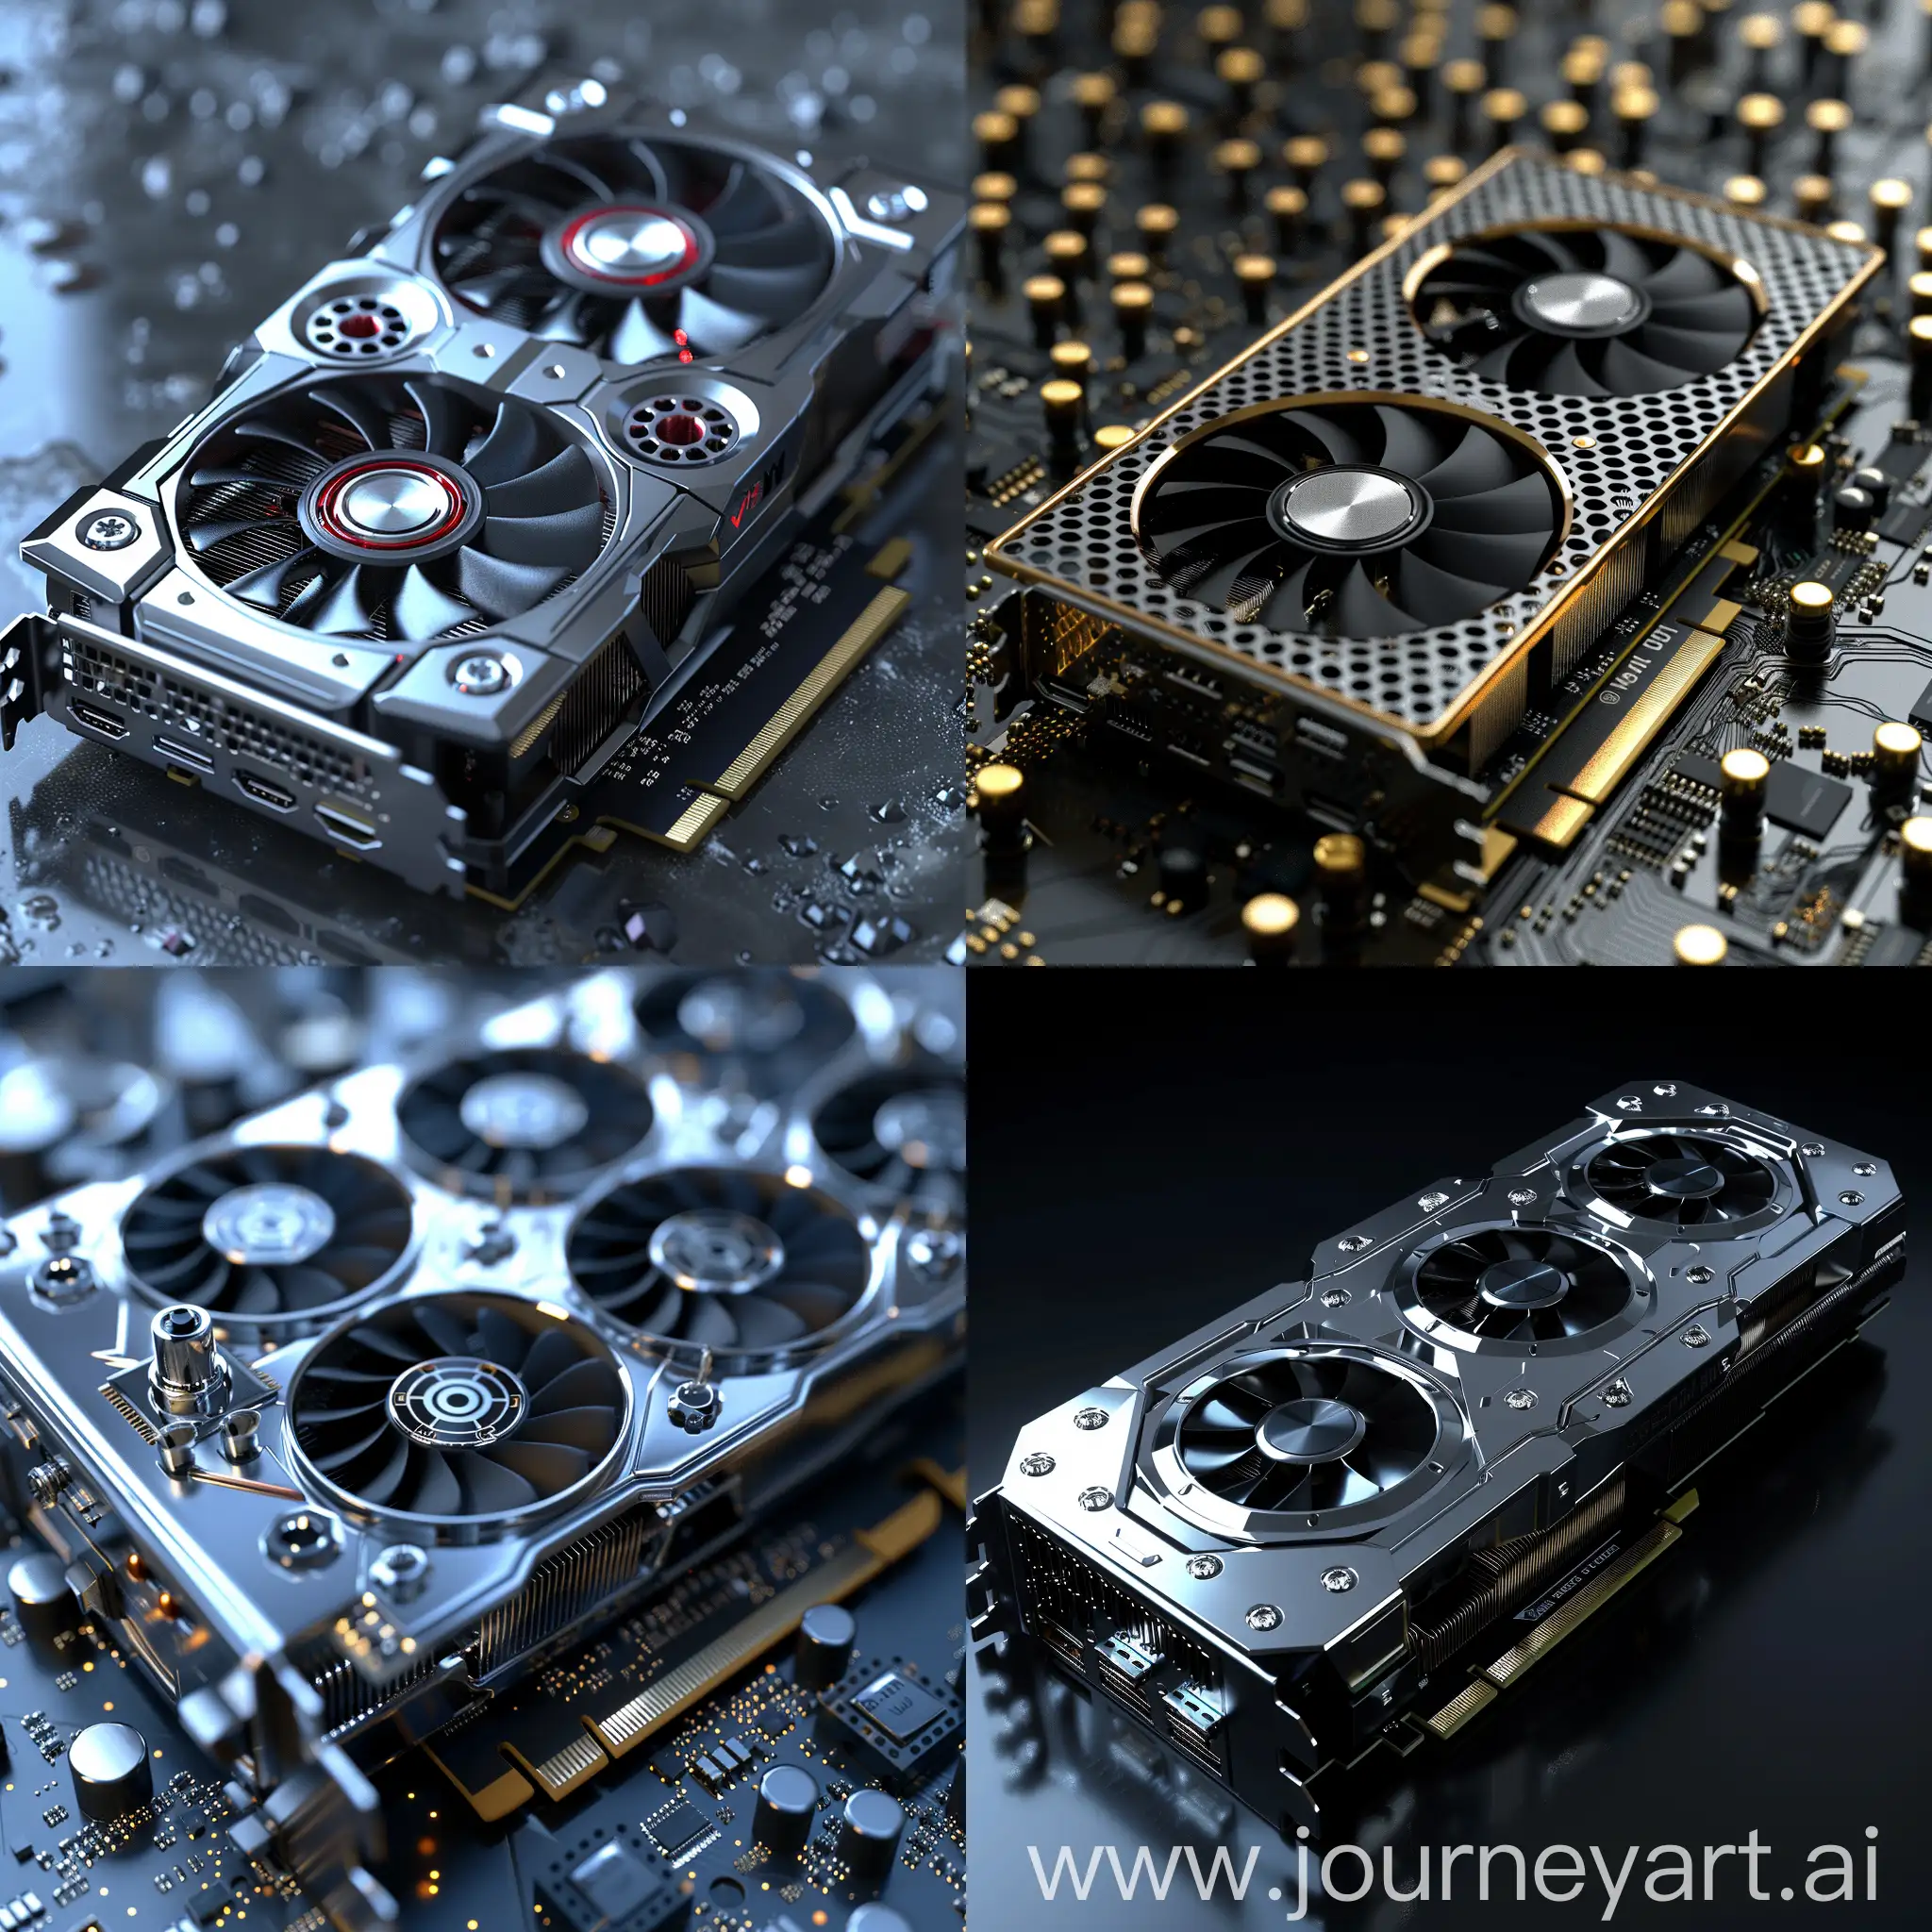 Futuristic-HighTech-Graphics-Card-with-Stainless-Steel-and-Smart-Materials